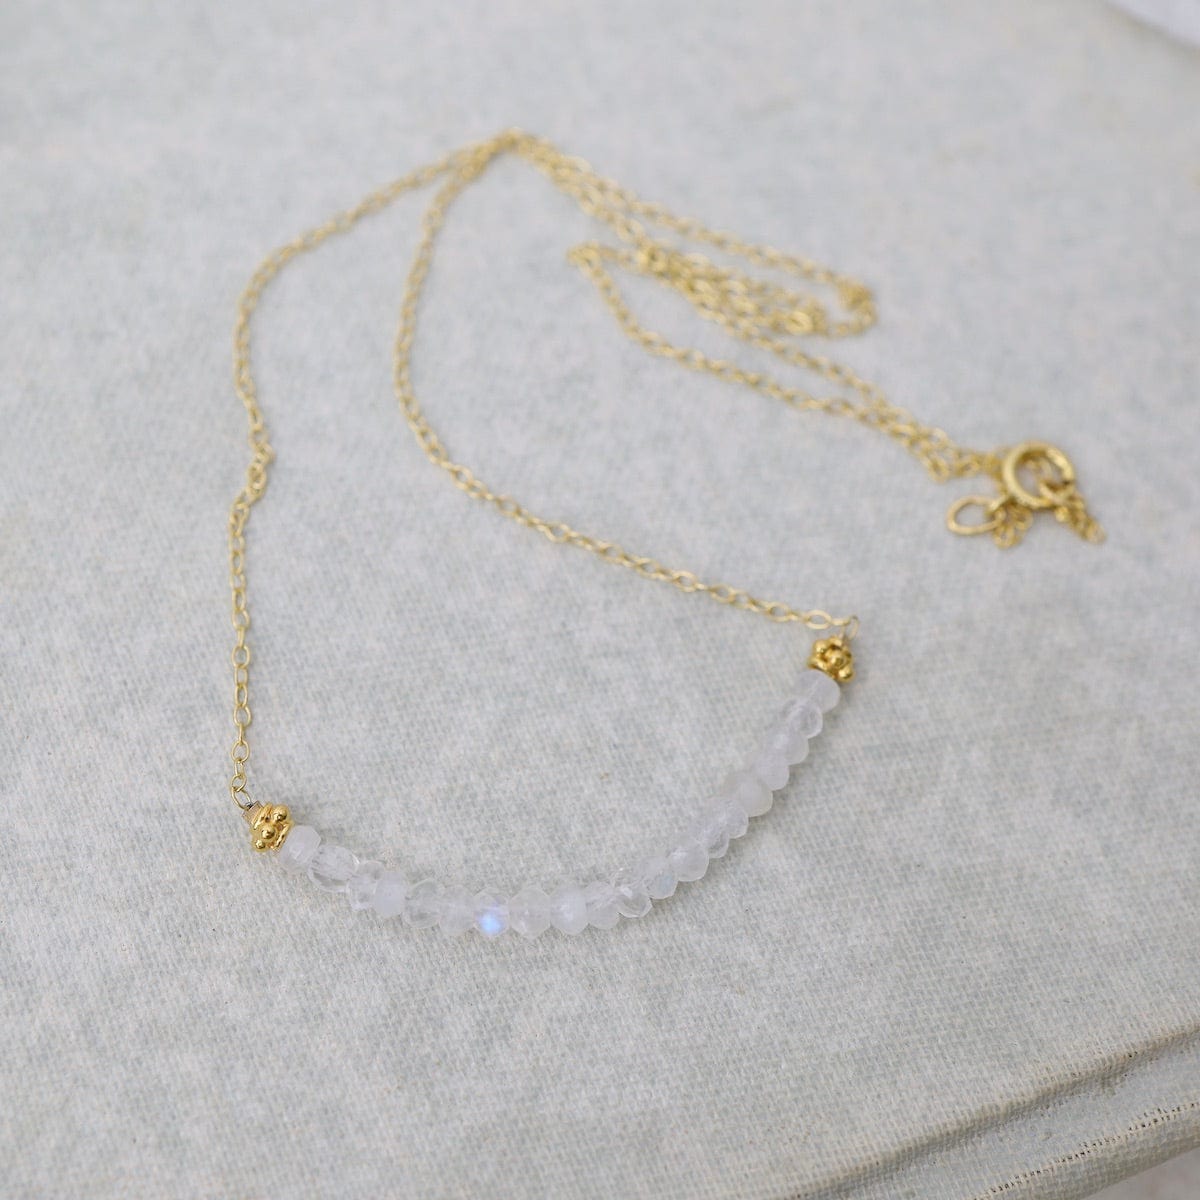 NKL-GF Gold Filled Chain with Gemstone Arc - Rainbow Moon